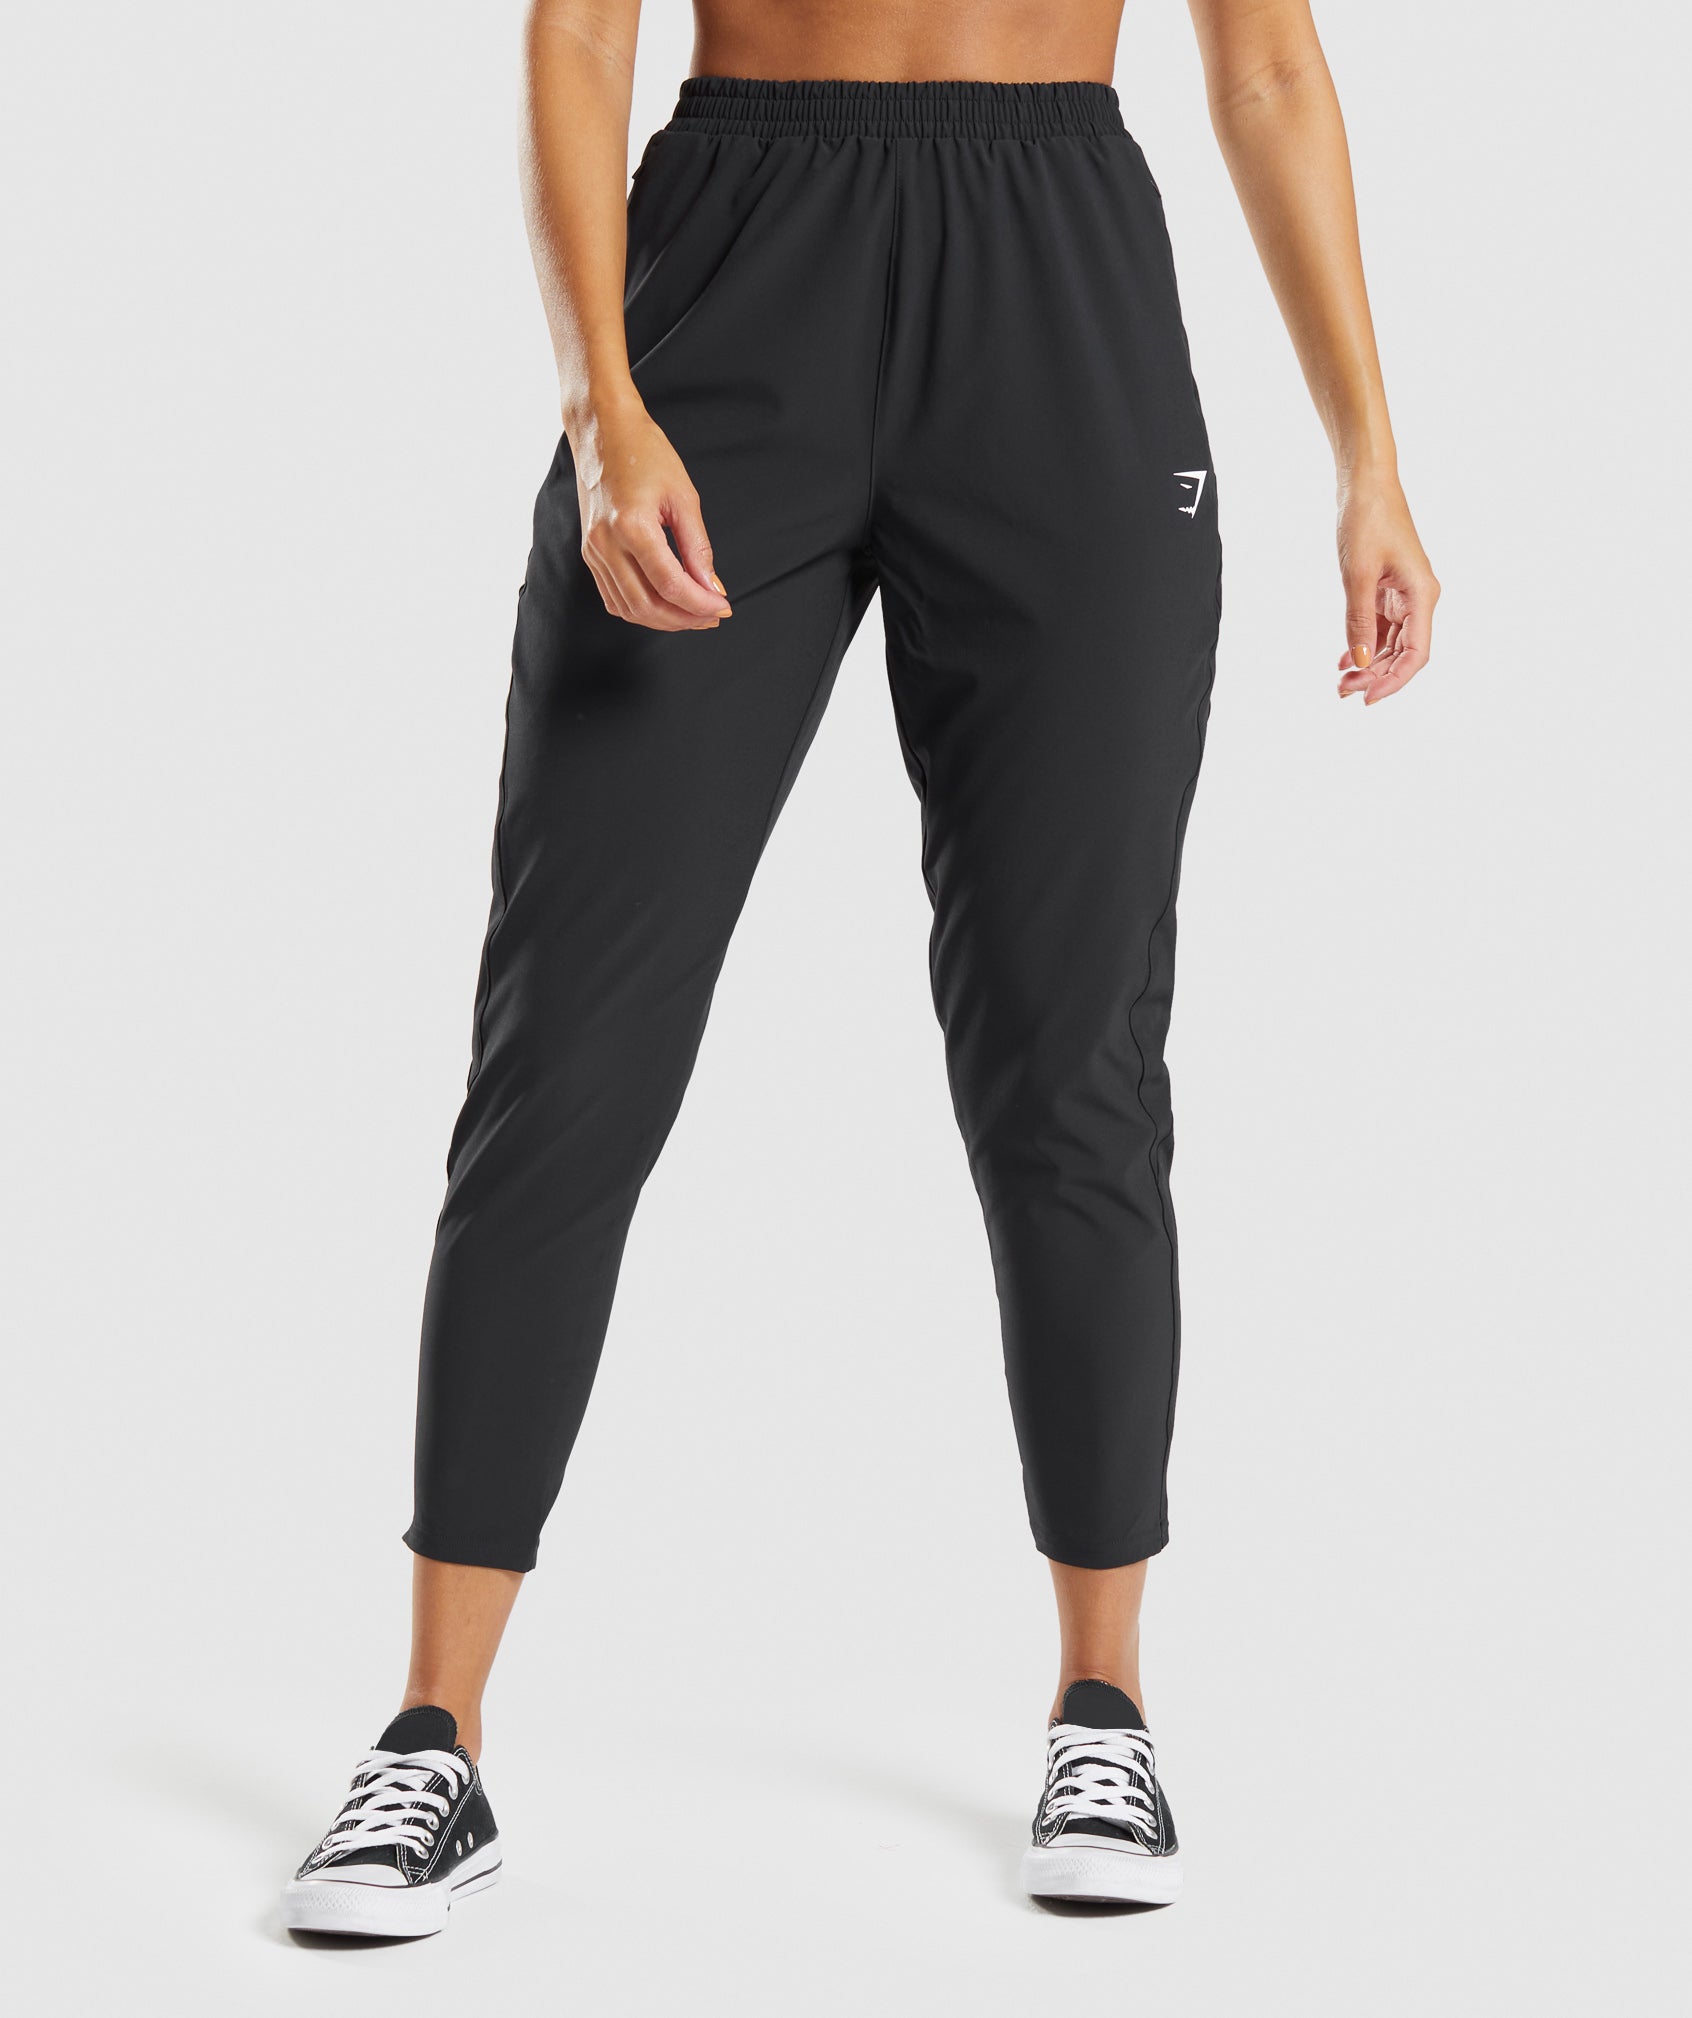  WHOUARE Women's Joggers Pants Workout Athletic